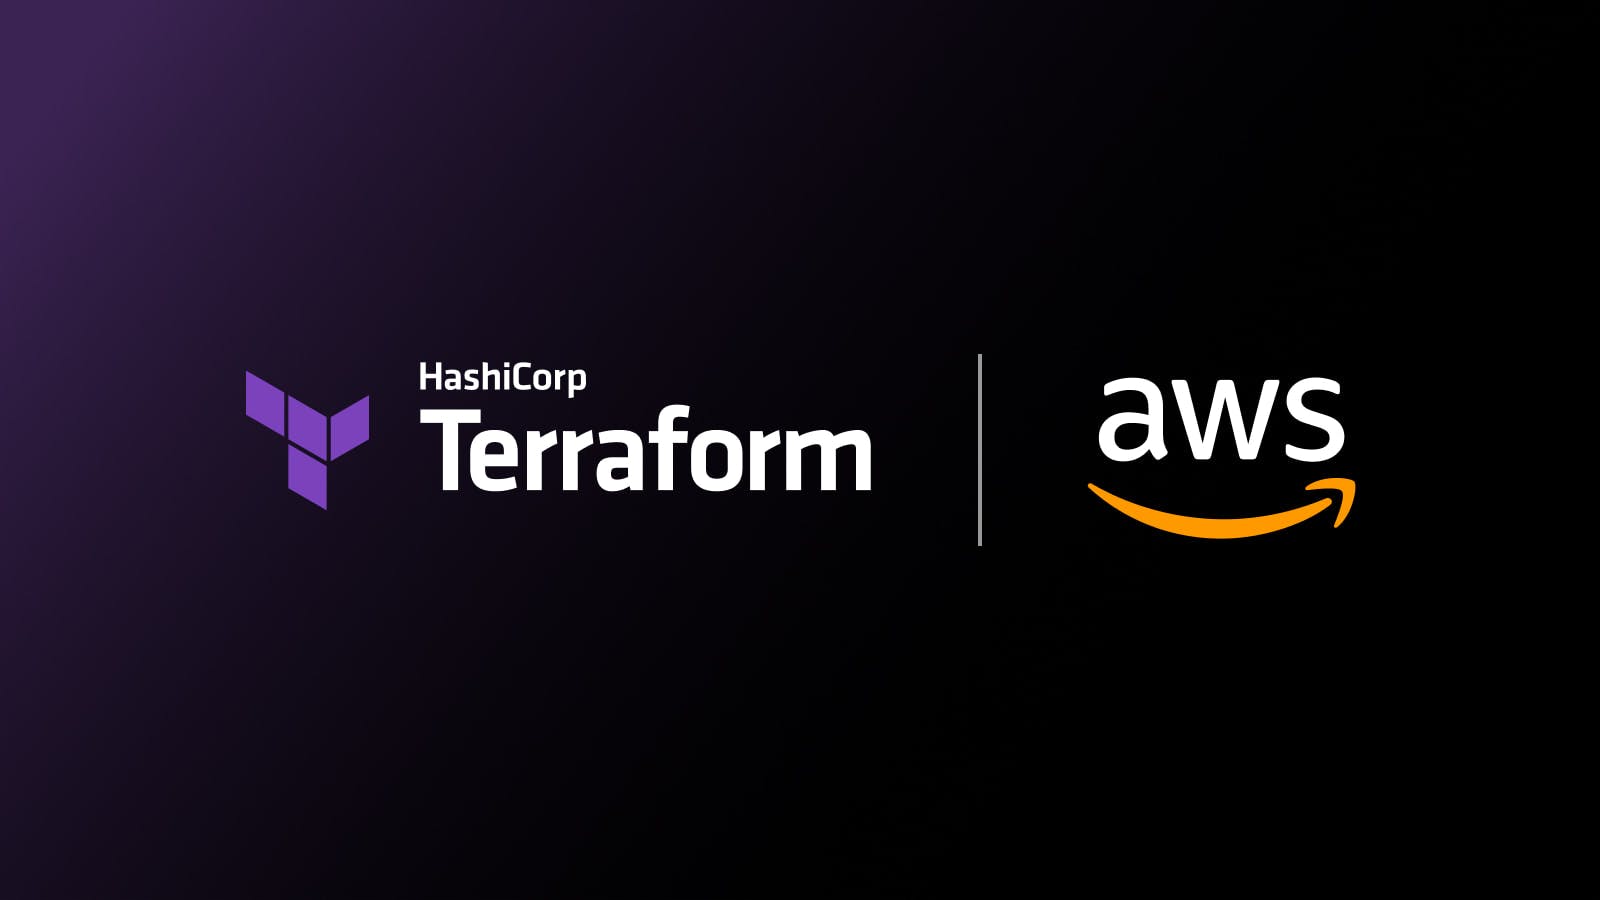 AWS and HashiCorp announce Service Catalog support for Terraform Cloud